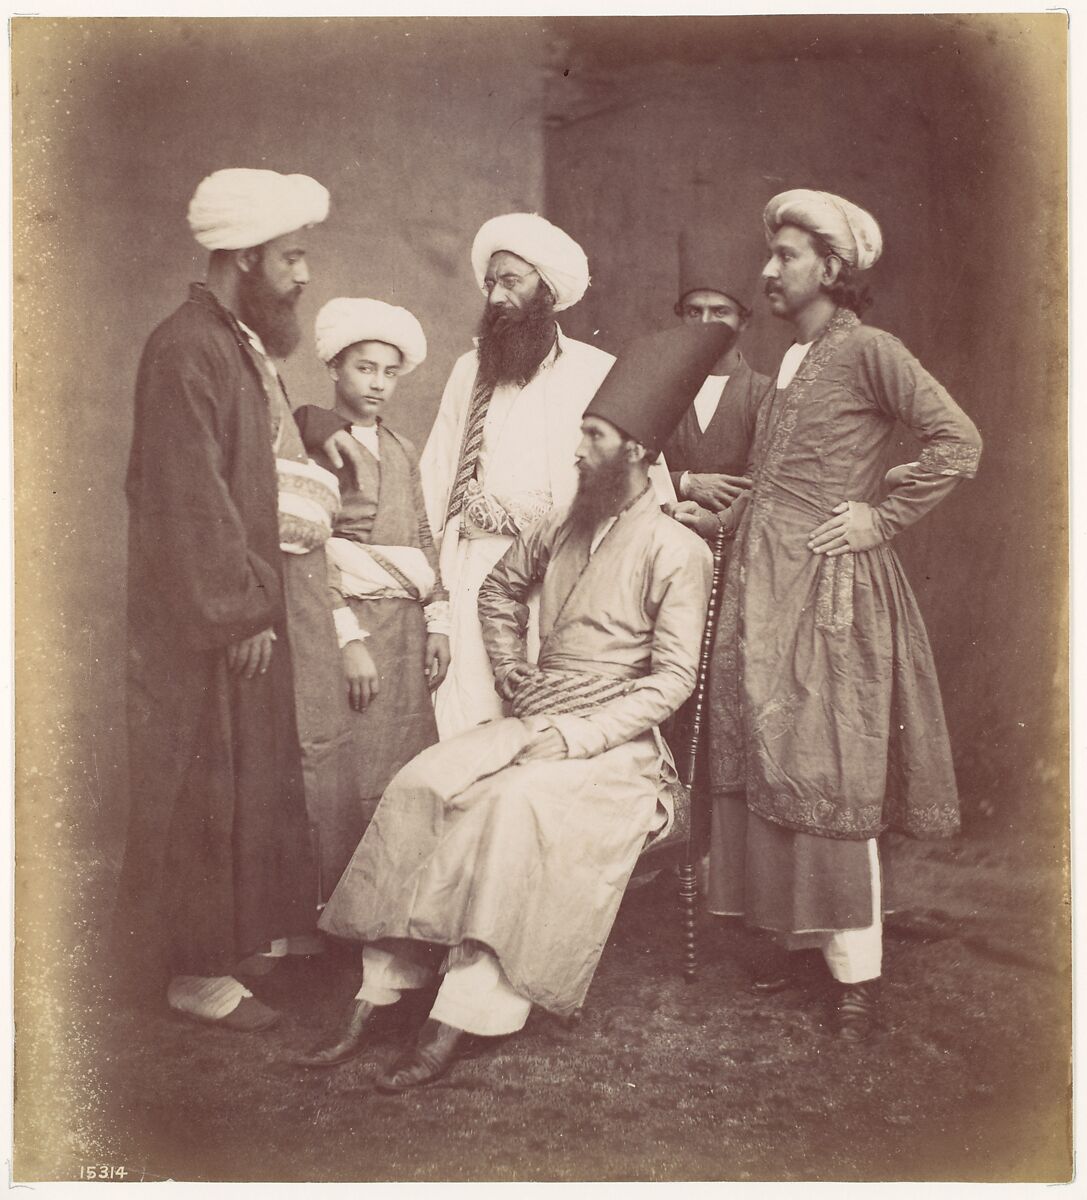 [Six East Indian Men], Francis Frith (British, Chesterfield, Derbyshire 1822–1898 Cannes, France), Albumen silver print from glass negative 